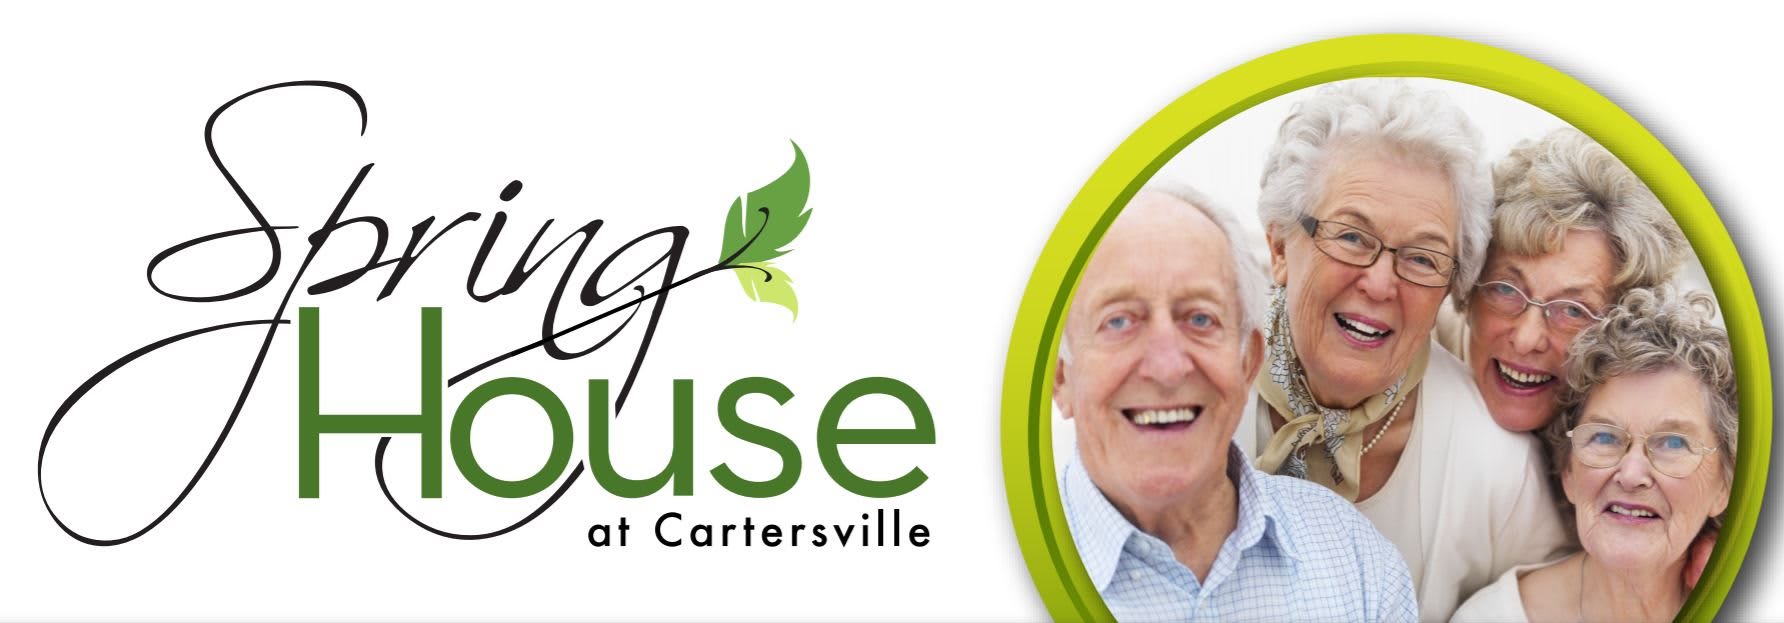 The Springhouse at Cartersville (Opening Early 2022) logo